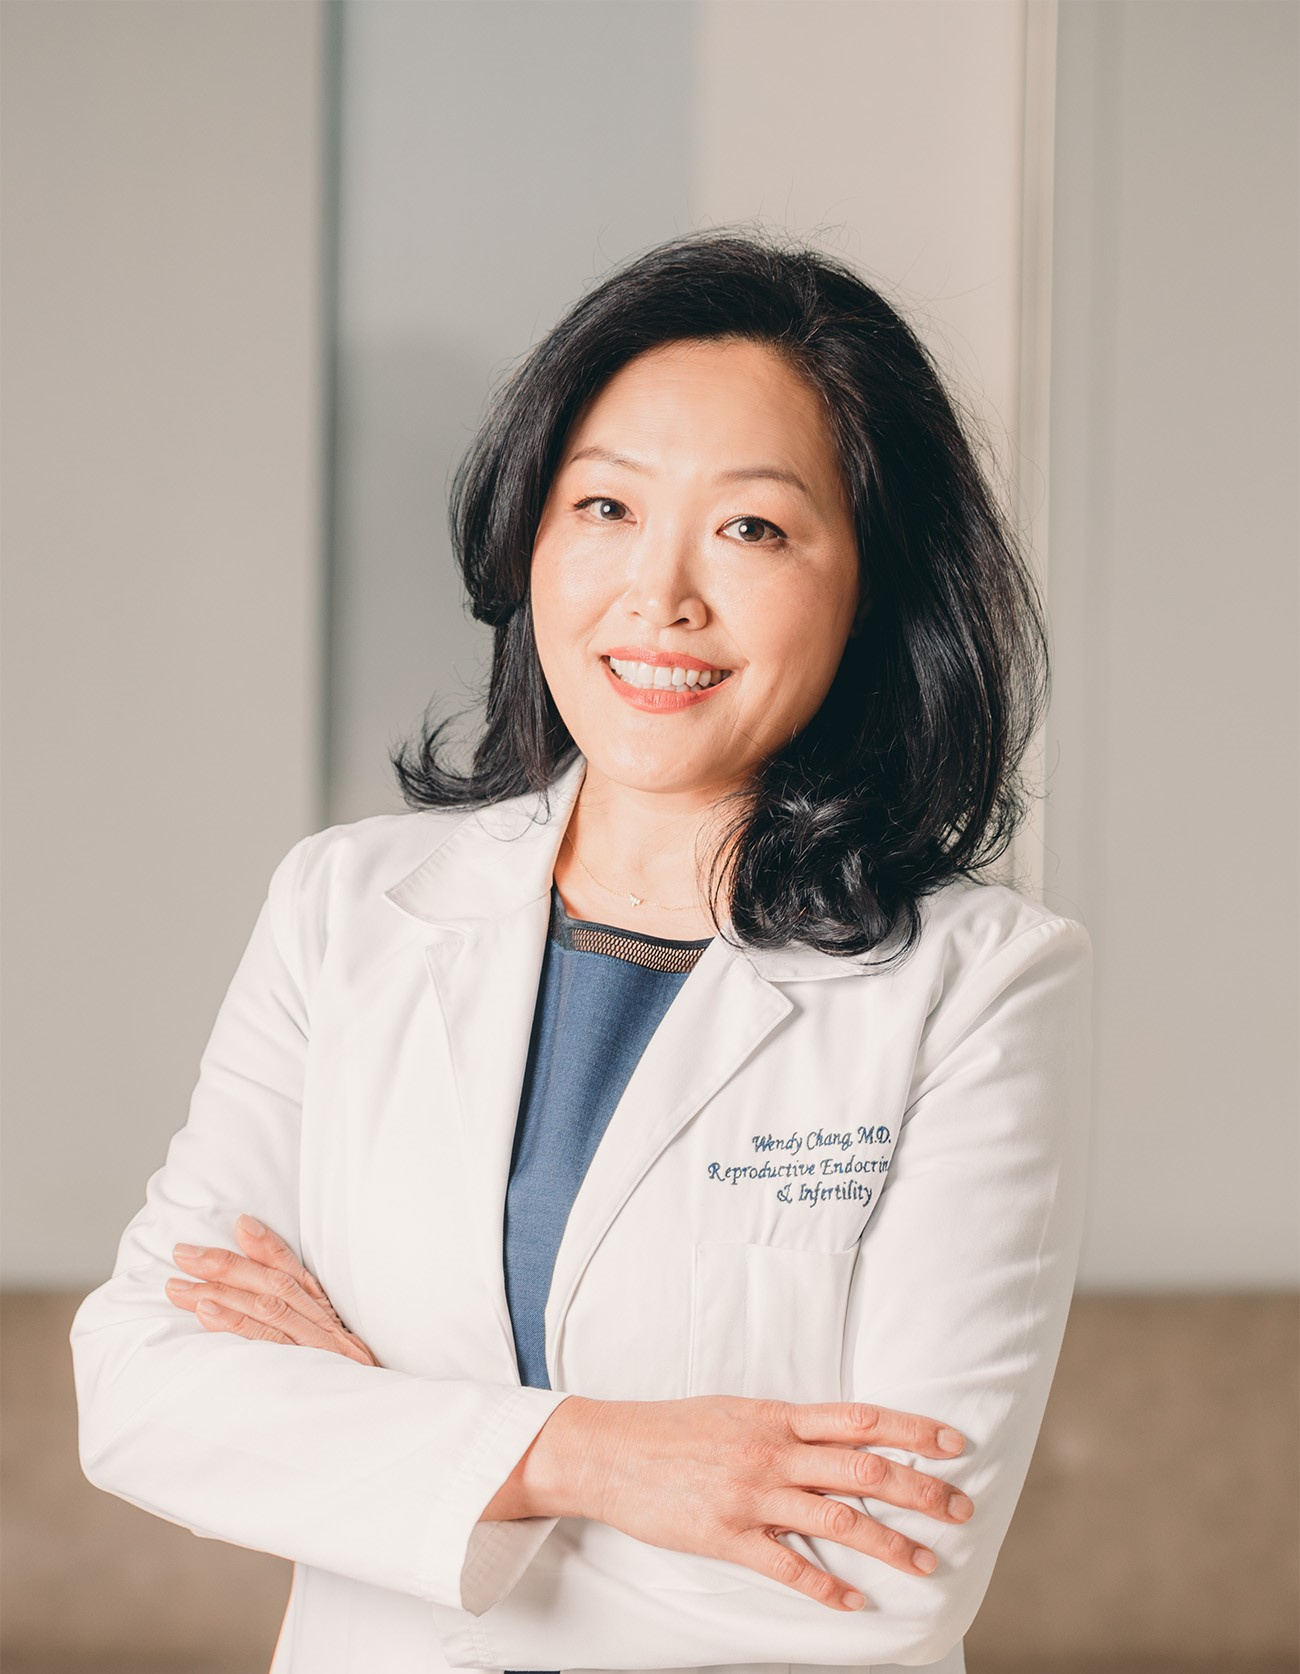 Dr. Wendy Chang, M.D., FACOG